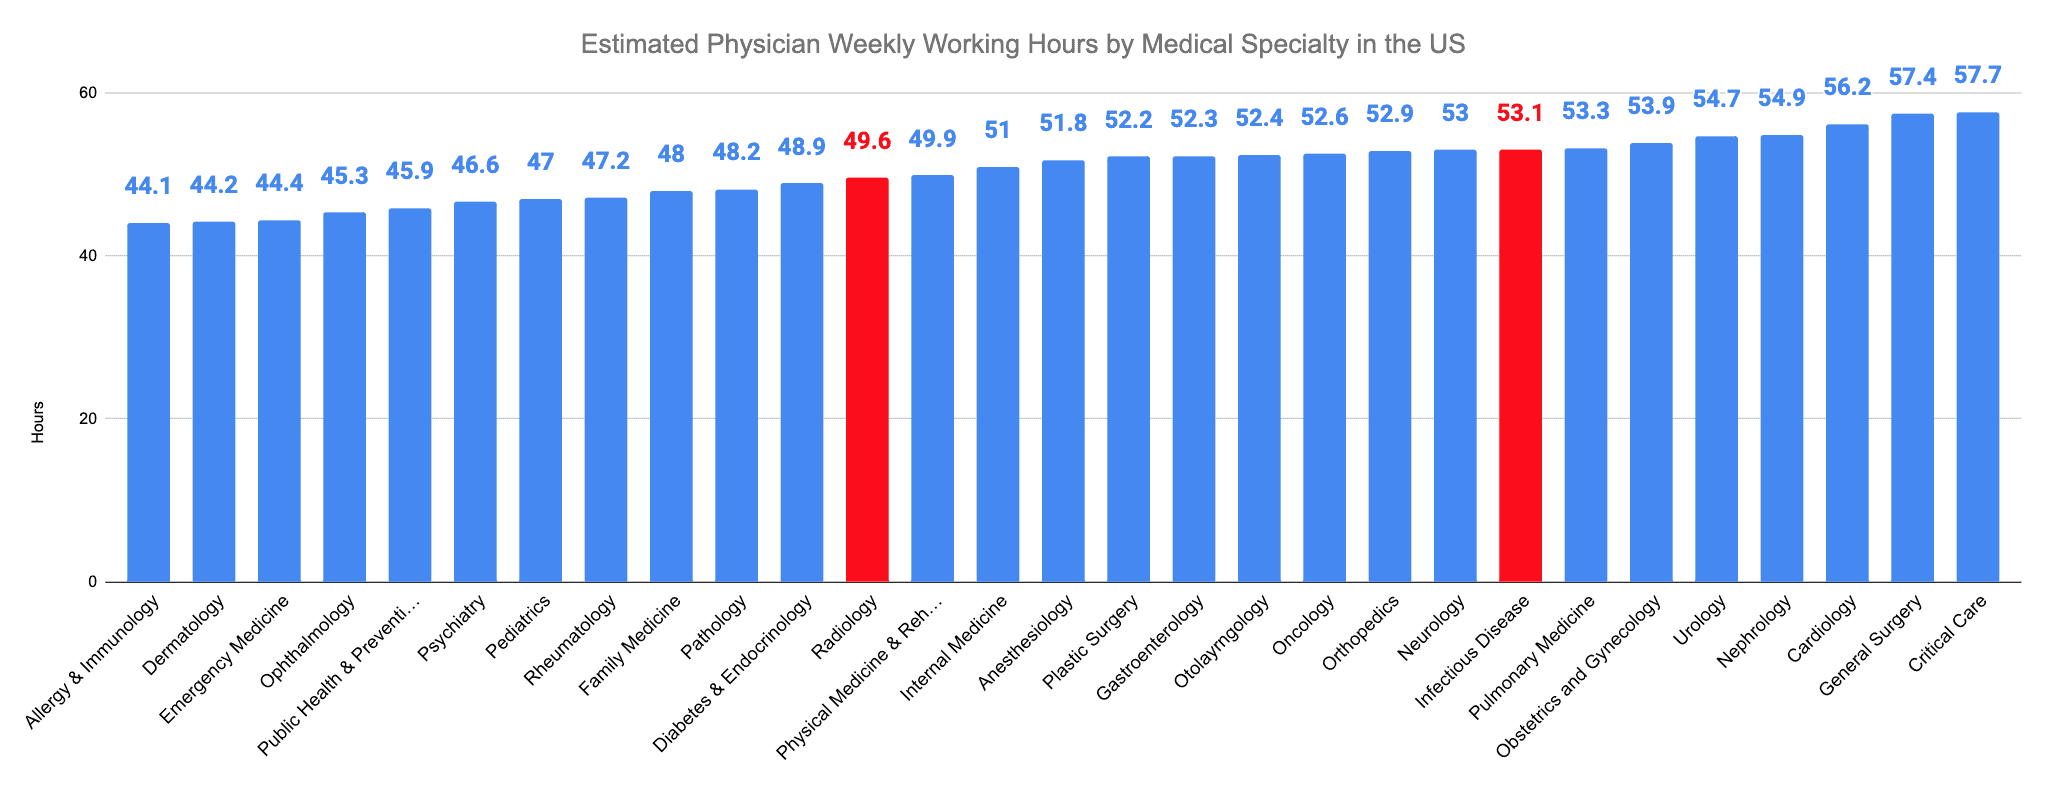 Radiology vs. Infectious Disease Estimated Physician Weekly Working Hours by Medical Specialty in the US